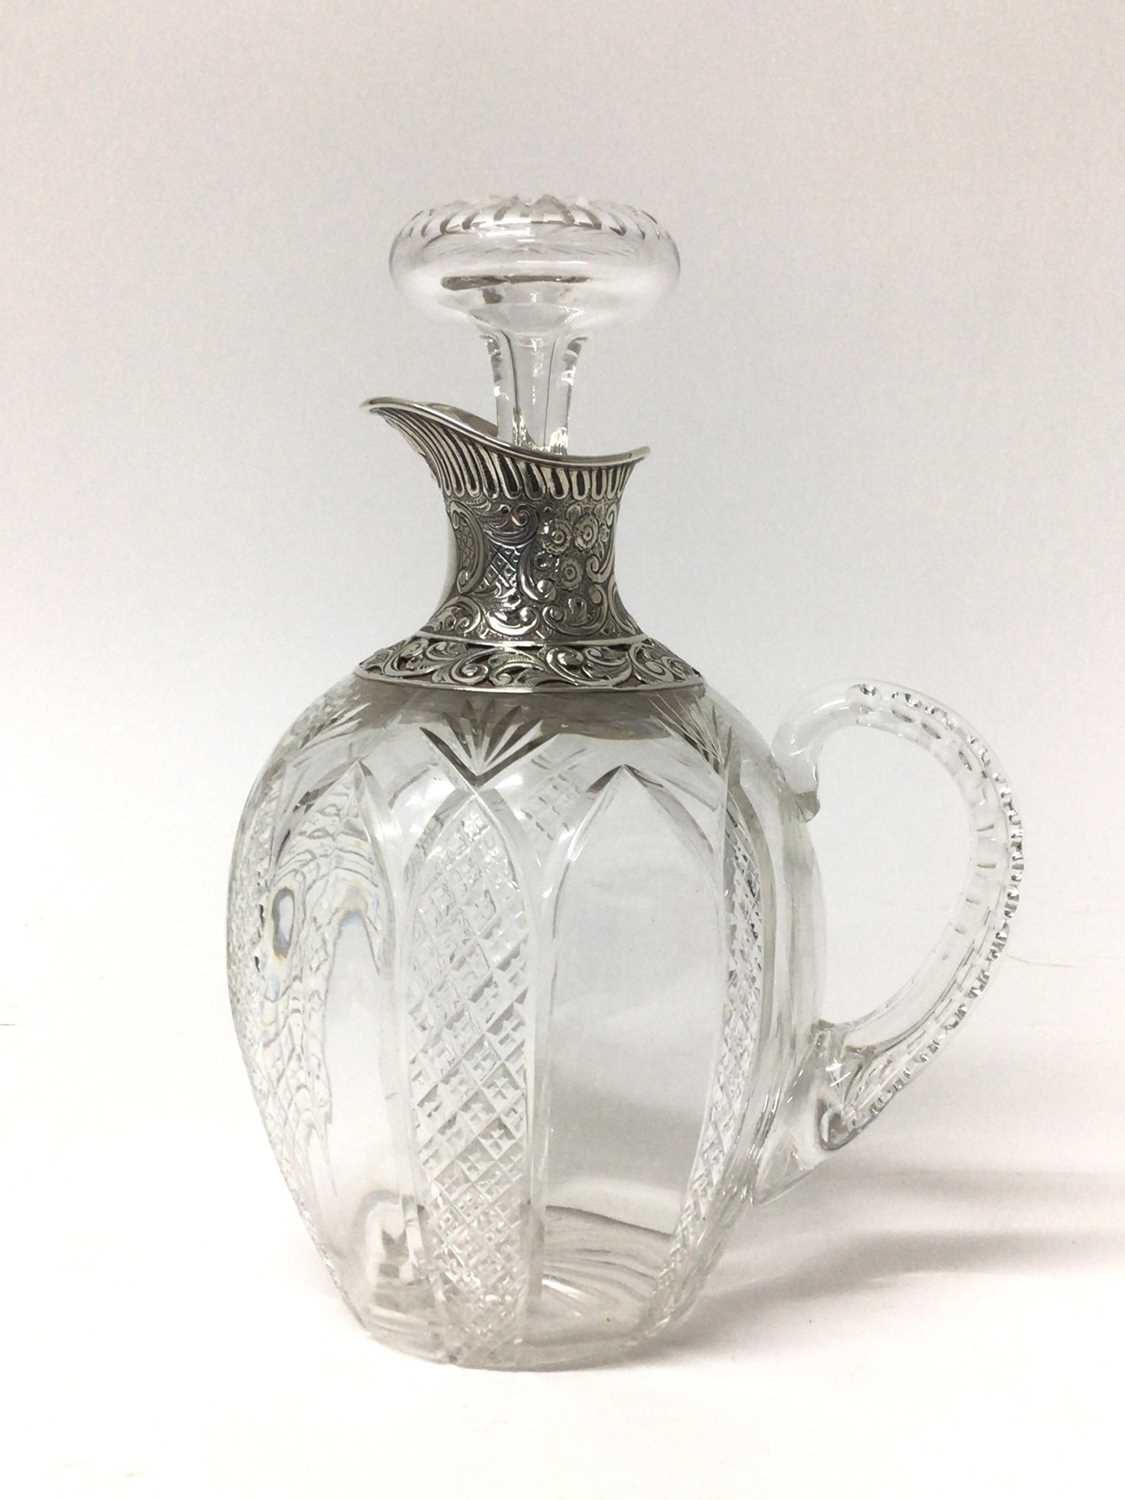 Lot 194 - Edwardian silver mounted cut glass claret jug with embossed and pierced silver spout and collar, the ovoid body with diamond cut decoration. Birmingham 1905. Height 22cm.